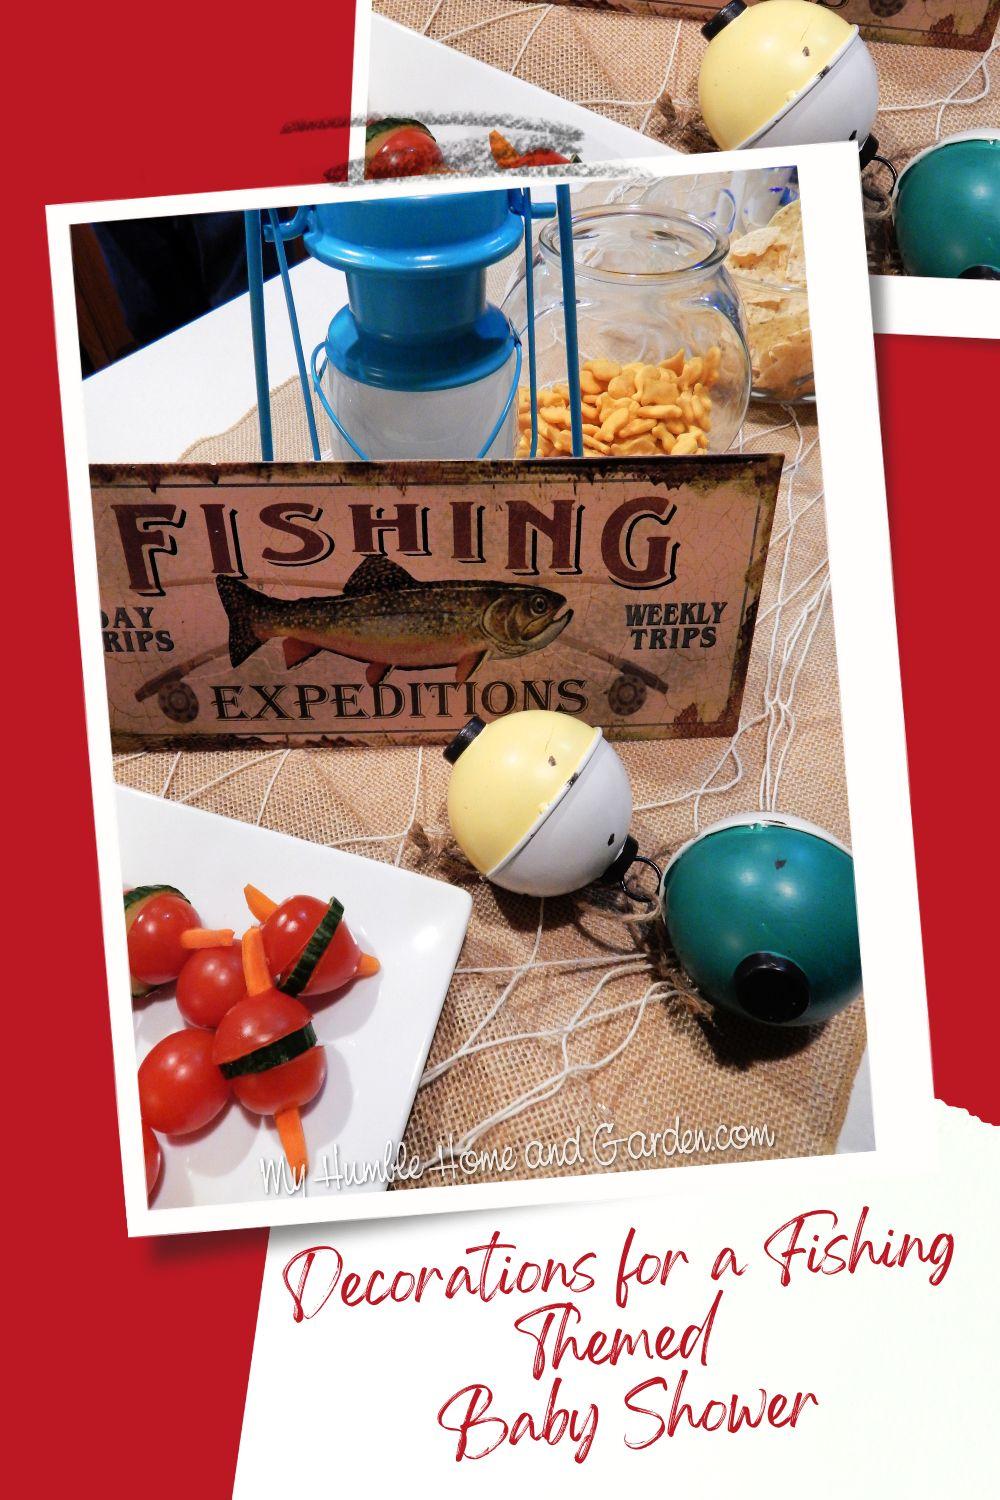 How to Decorations for a Fishing Themed Party - My Humble Home and